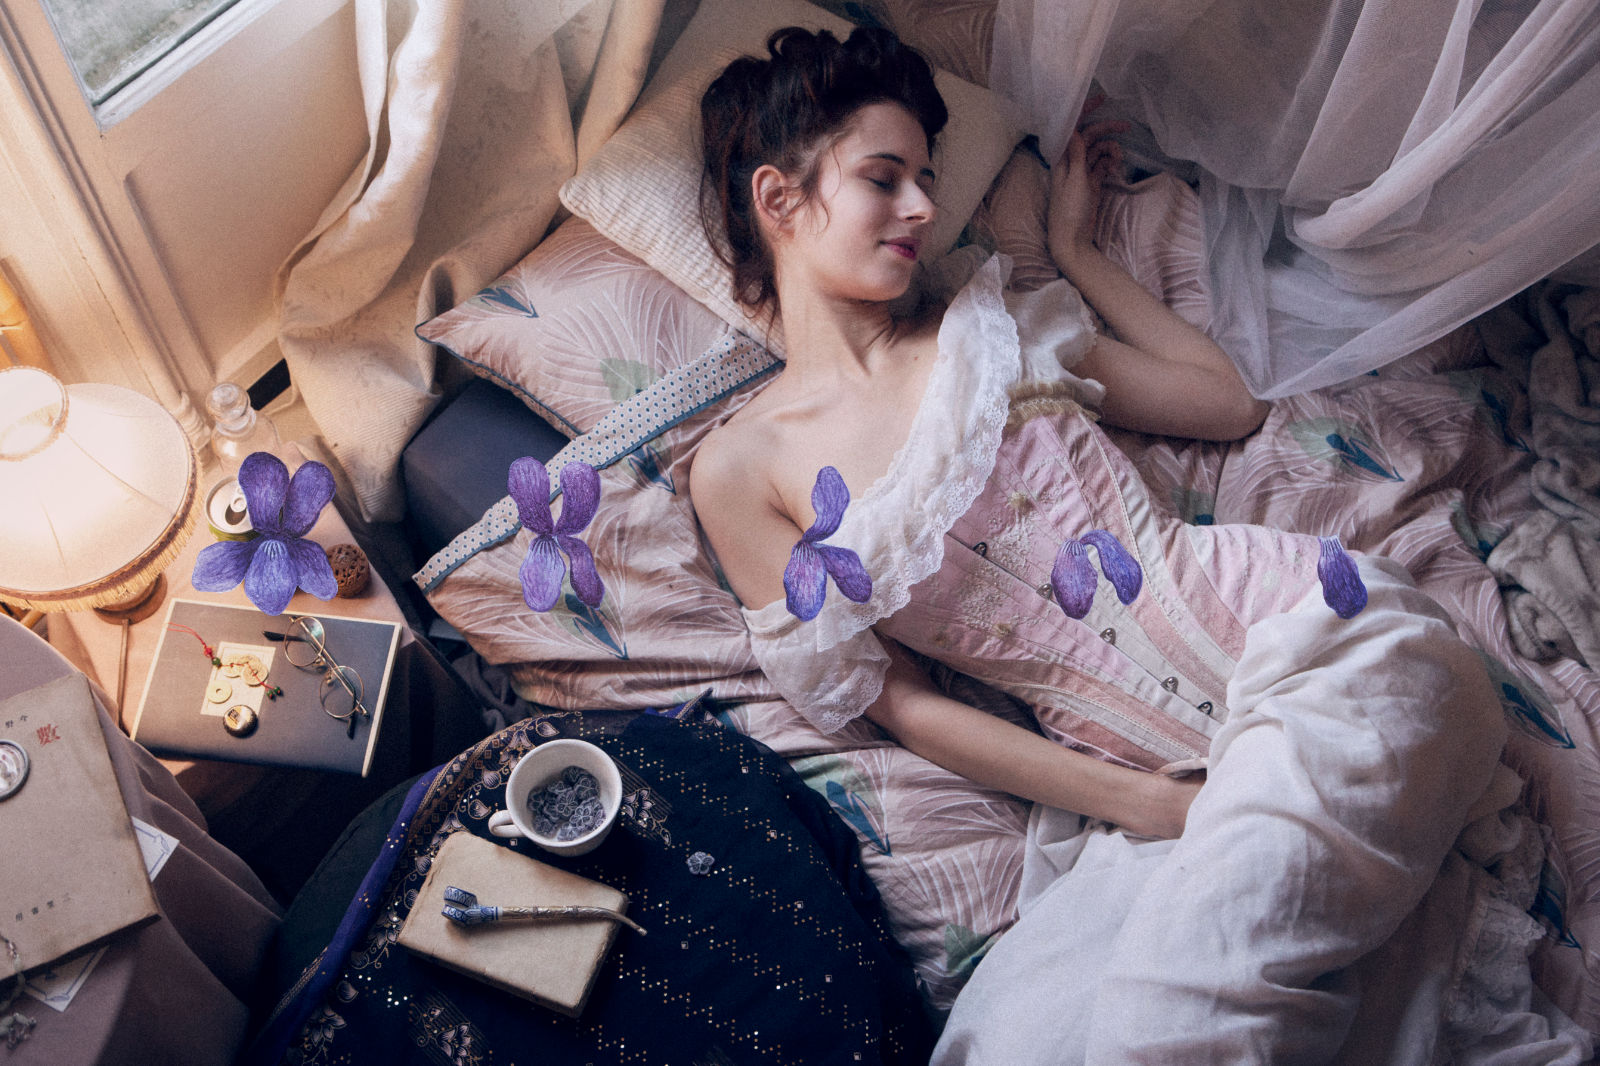 “À la deux fois née”, a mixed media collaboration between poetess and model Anne-Rebecca Willing, photographer Solène Ballesta and messalyn for the watercoloured violets.